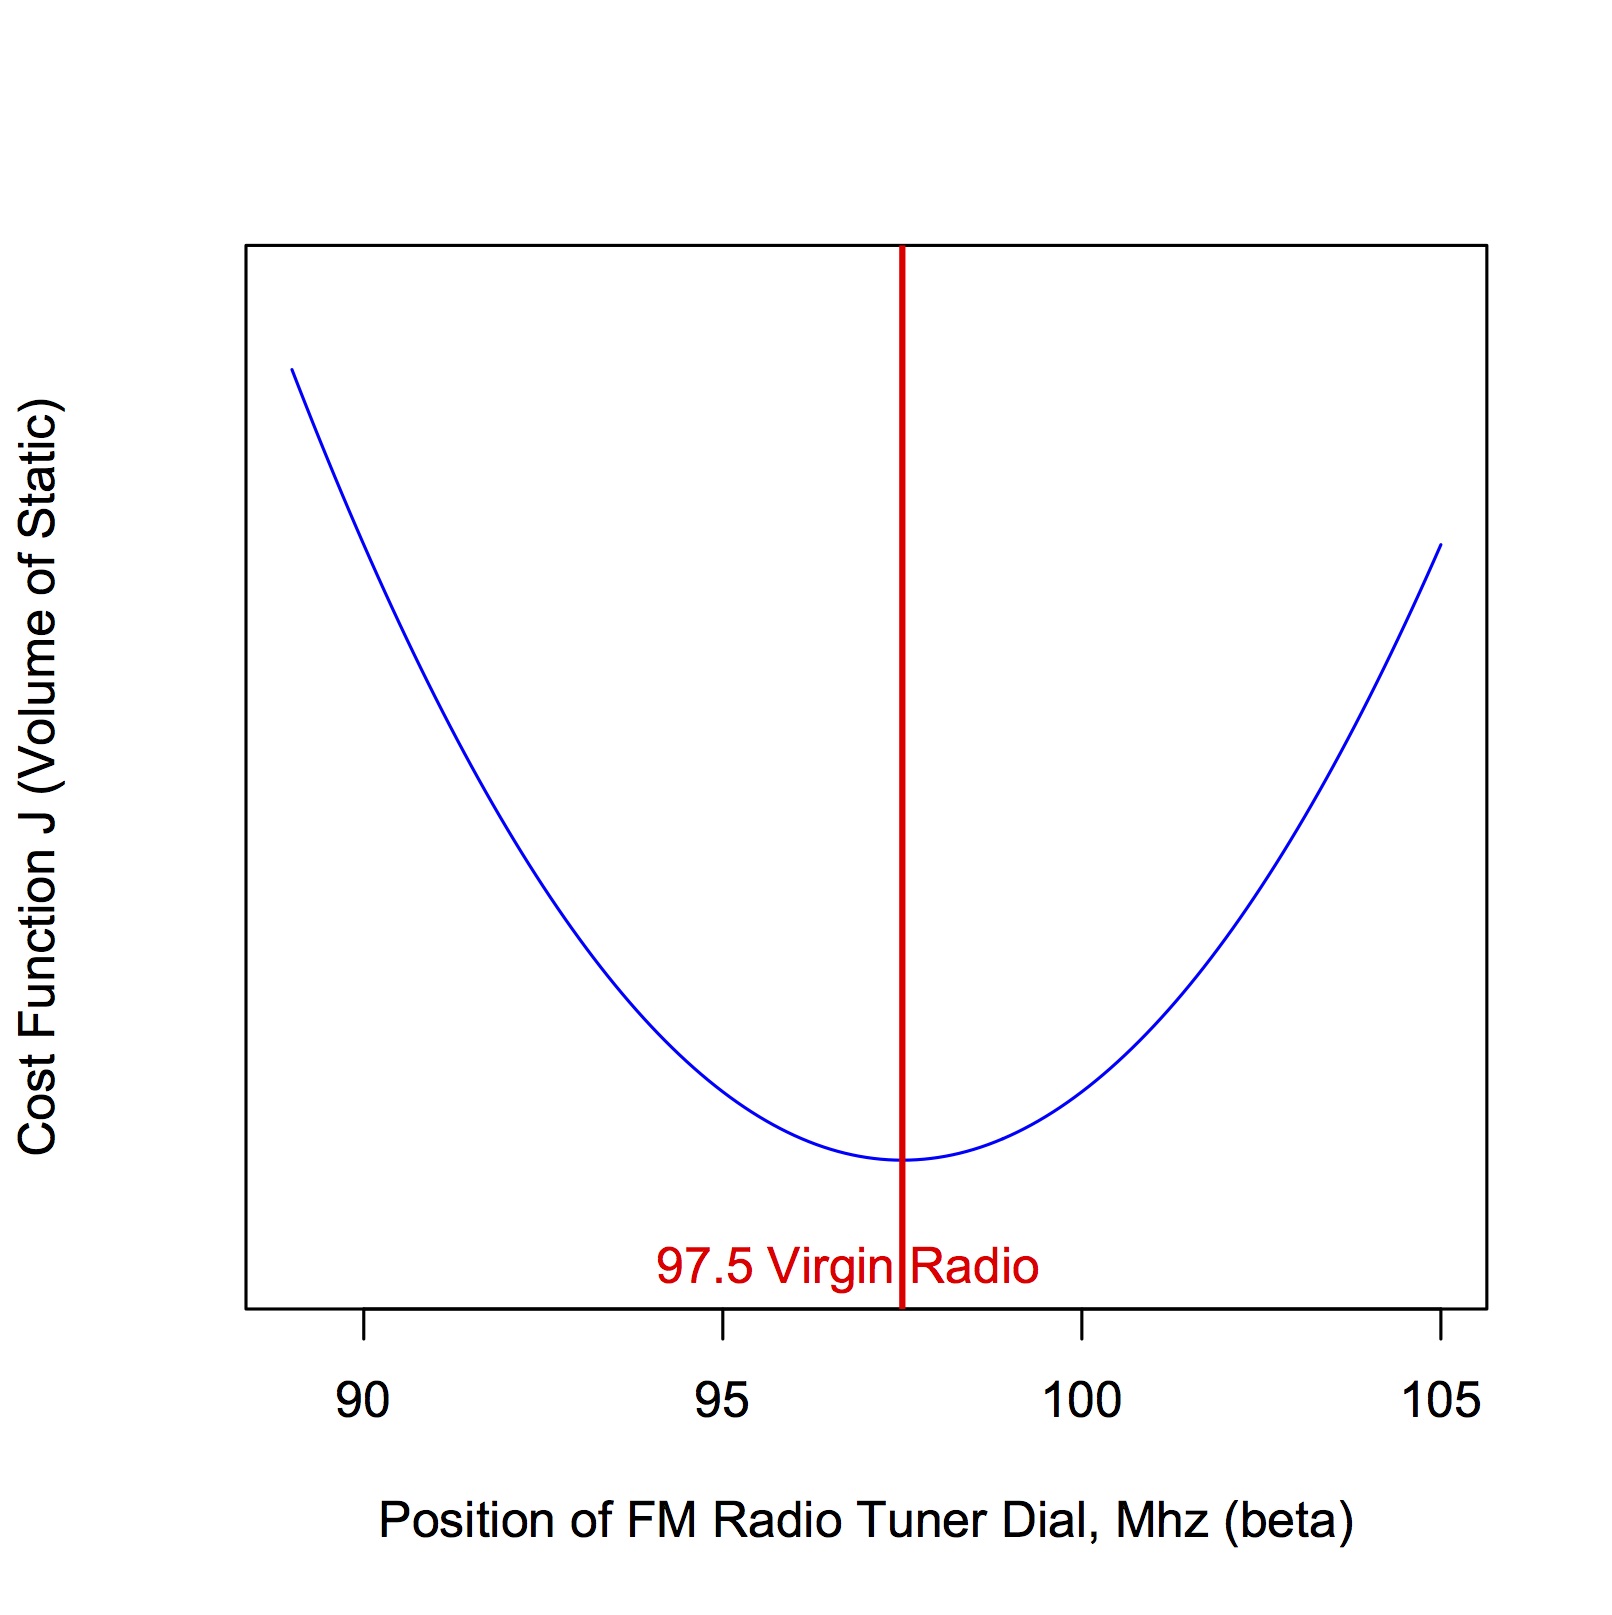 Figure 1: Cost function for tuning a radio.